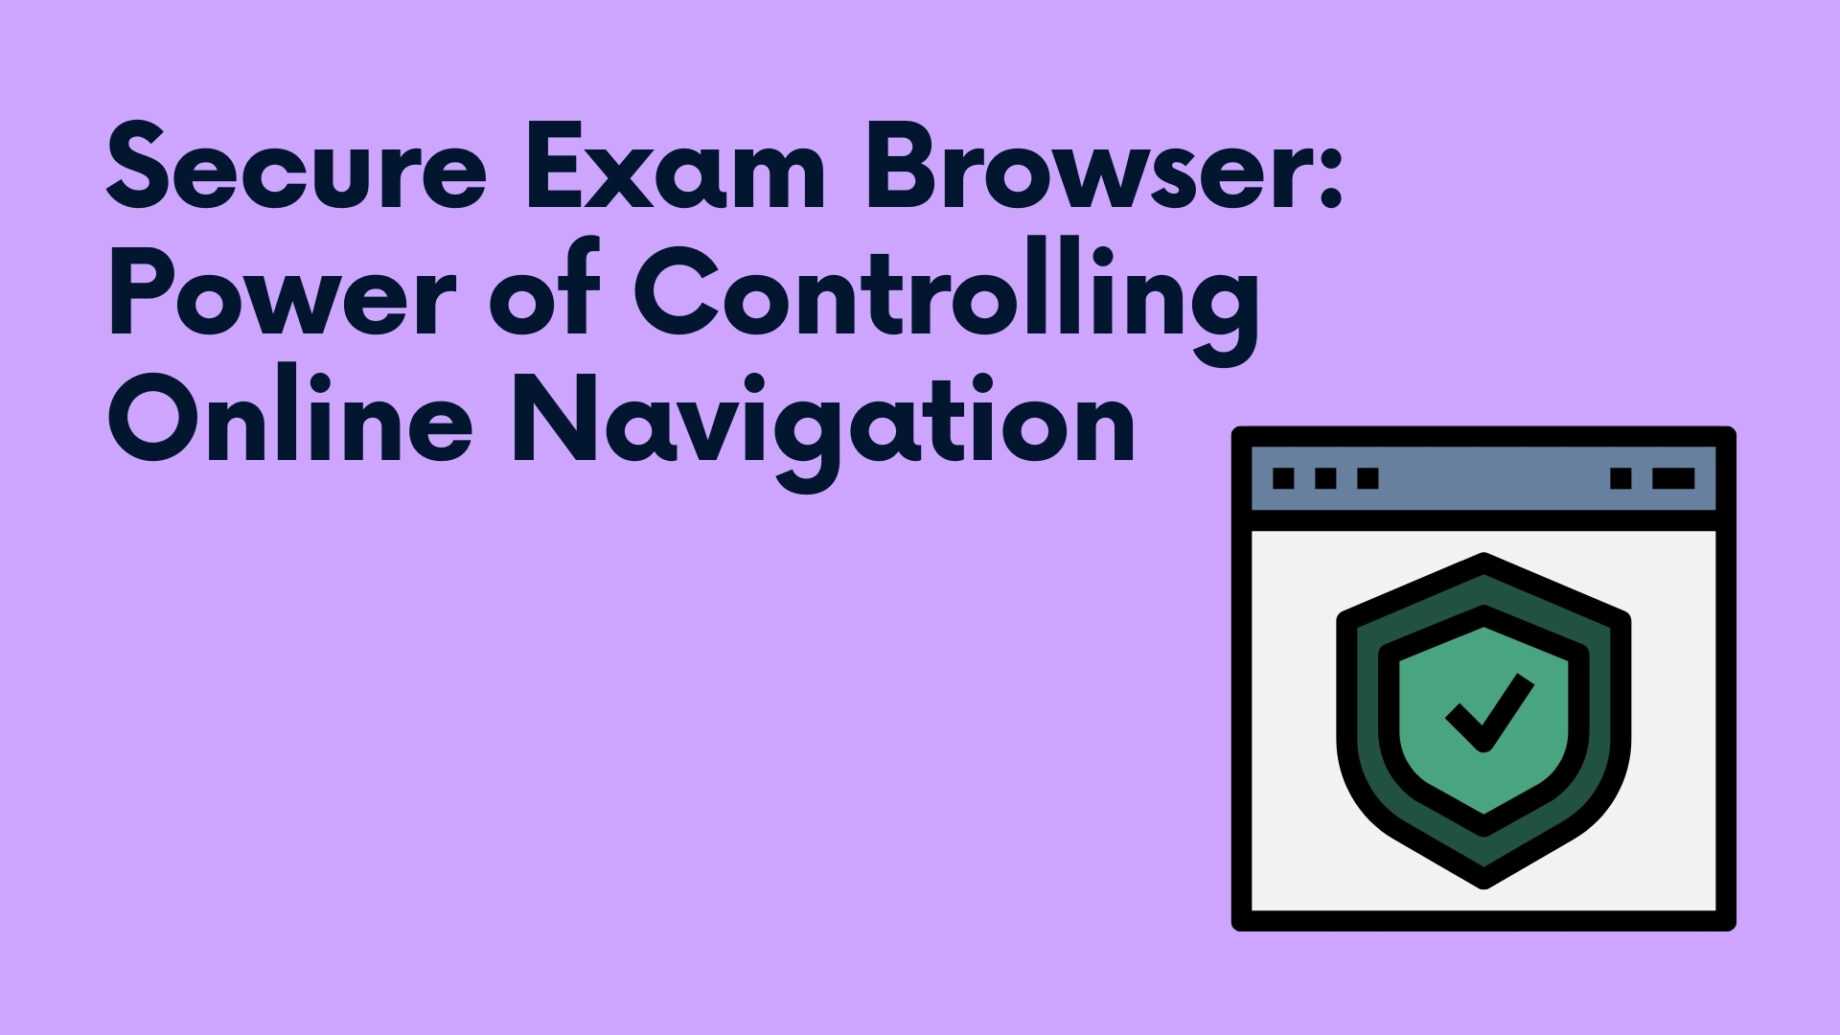 Secure Exam Browser: Power of Controlling Online Navigation